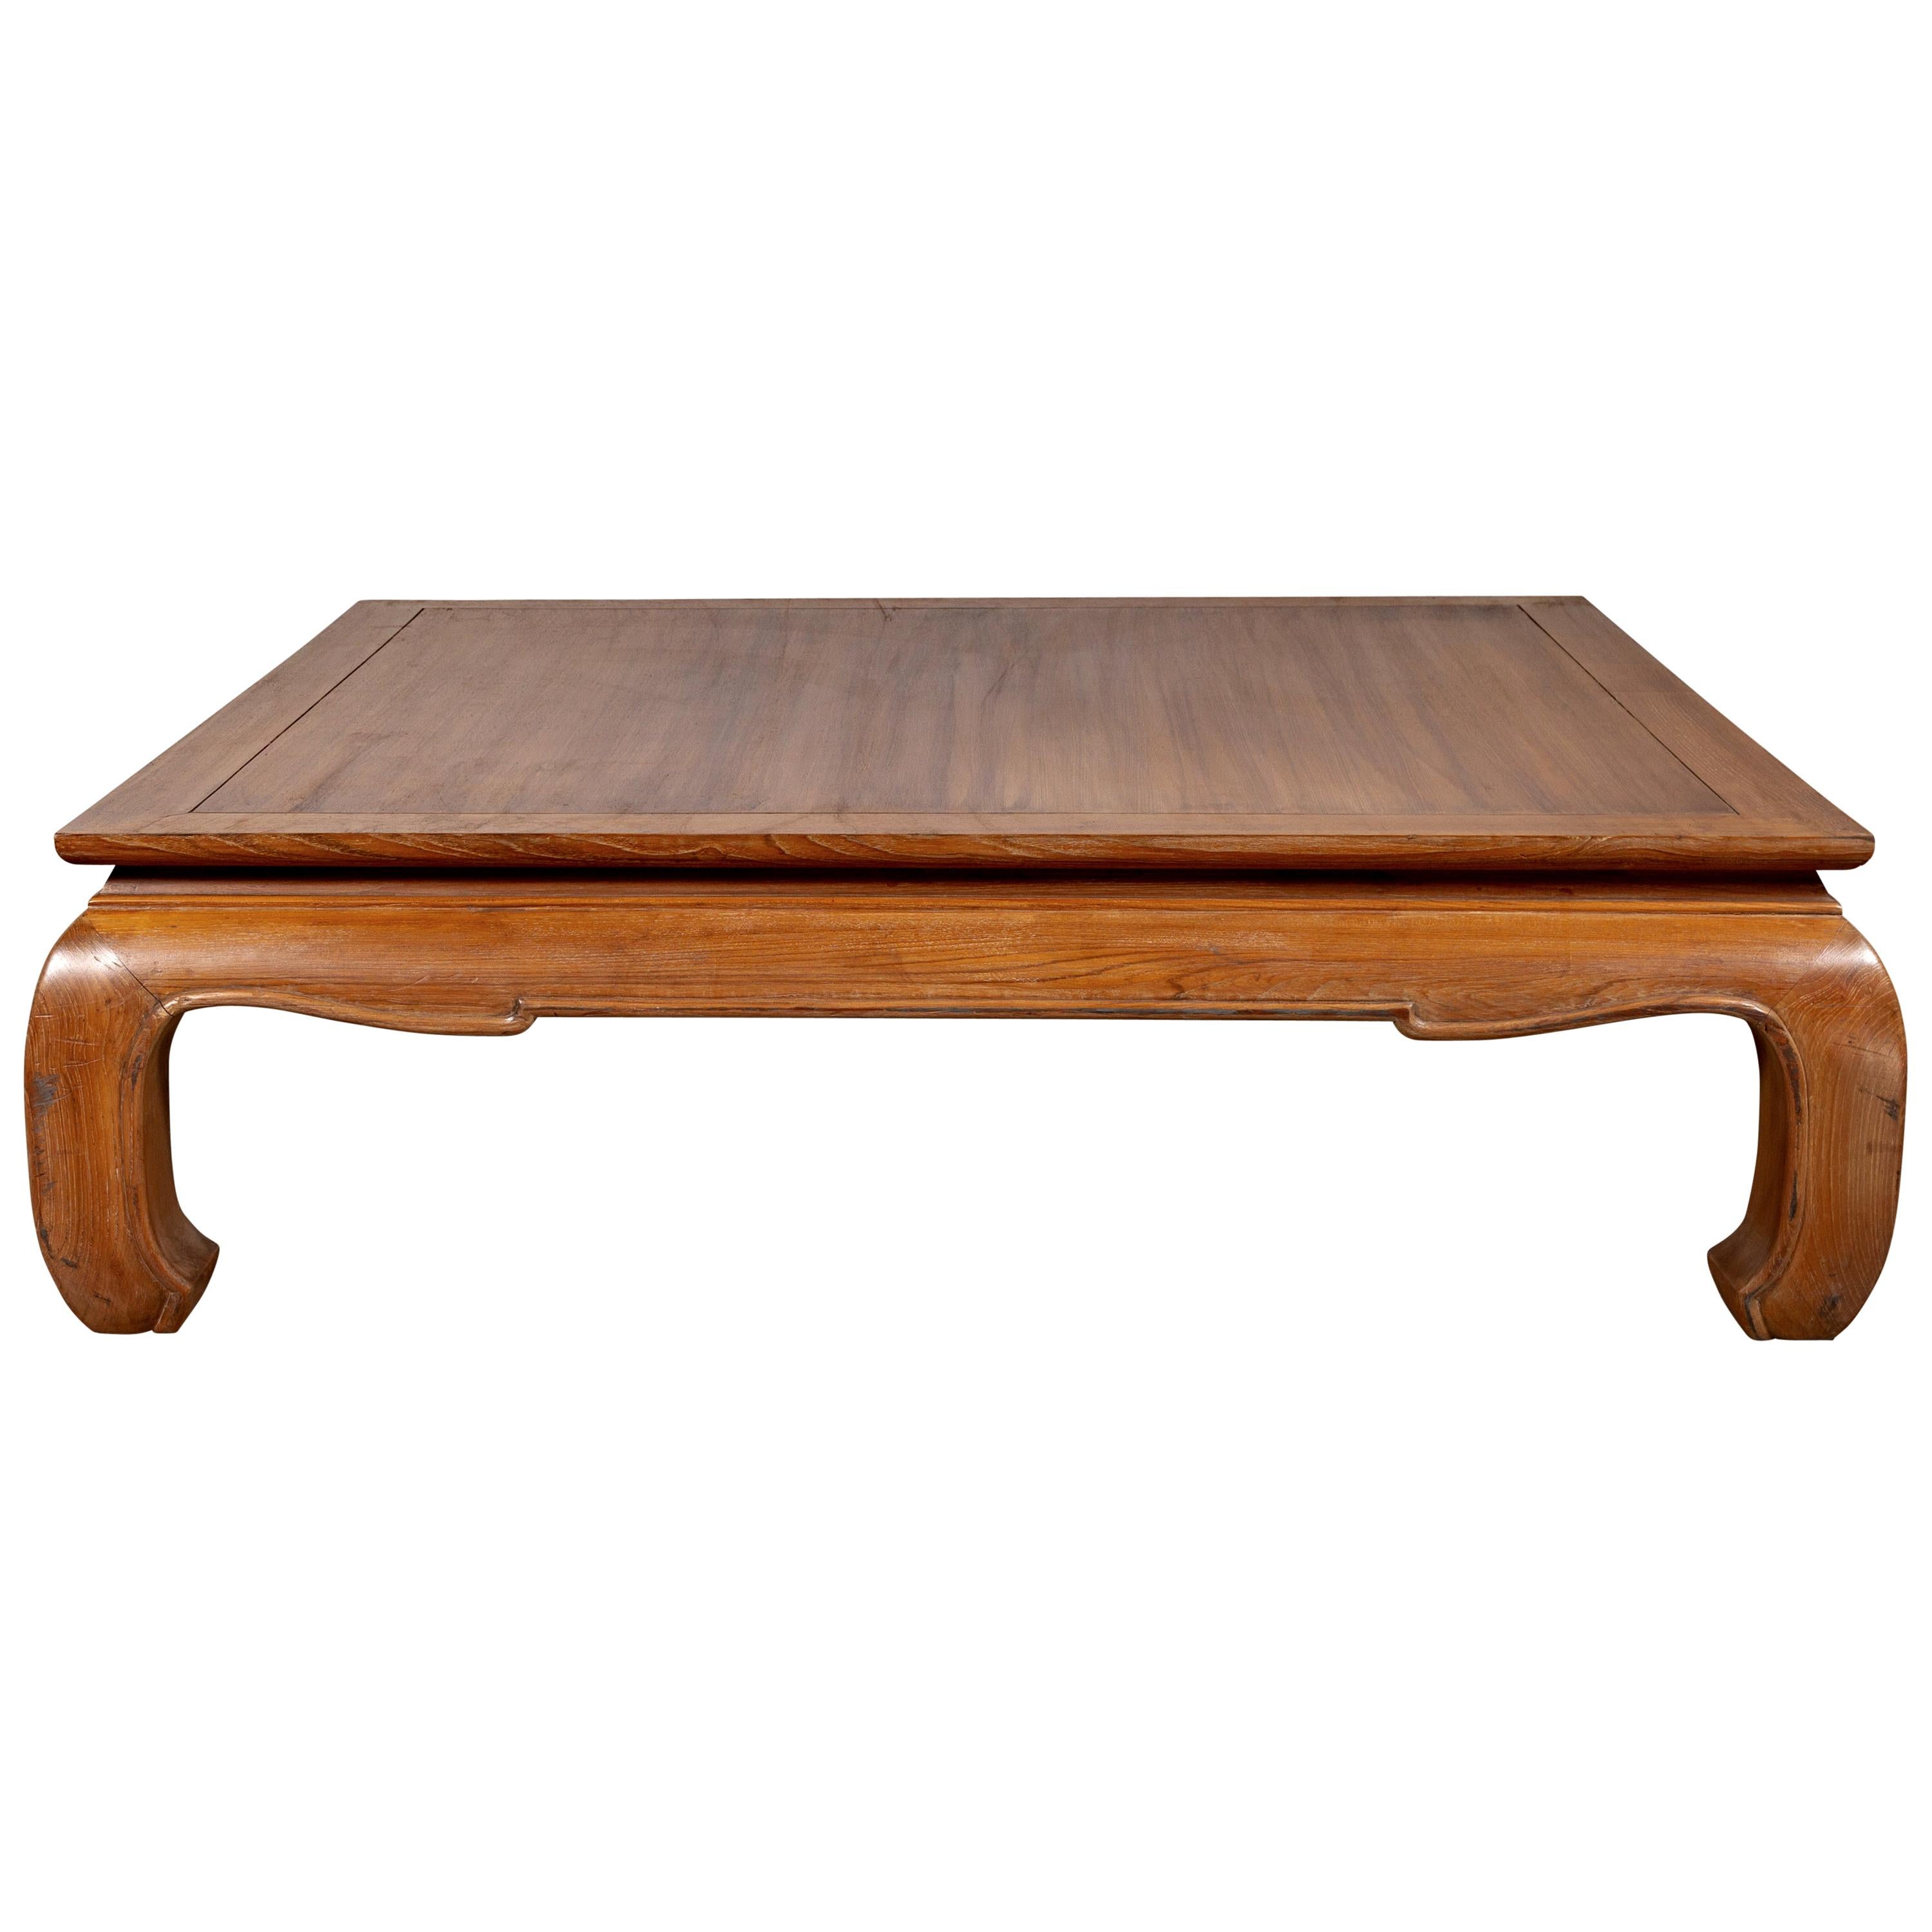 Vintage Indonesian Teak Coffee Table with Natural Bleached Patina and Chow Legs